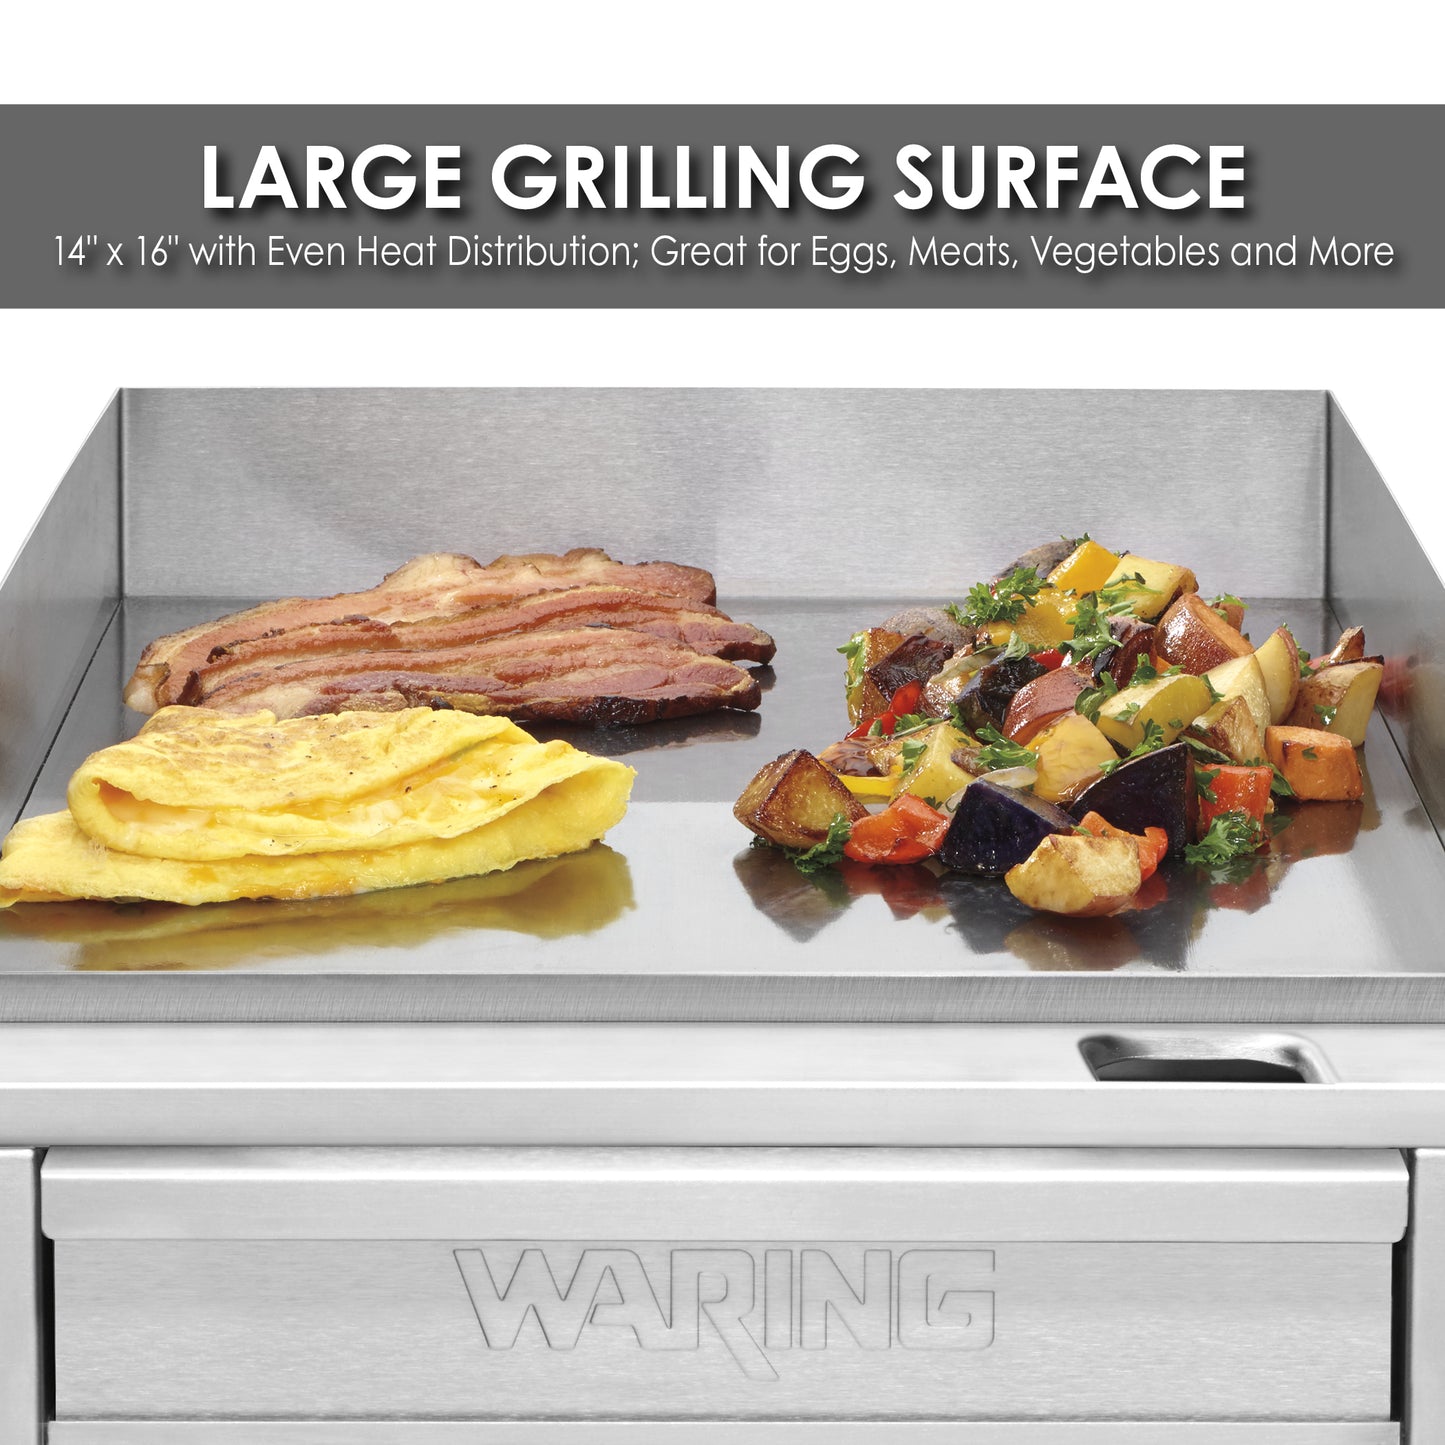 Waring WGR140X Countertop Electric Griddle — 120V, 1800W (14" x 16" cooking surface)